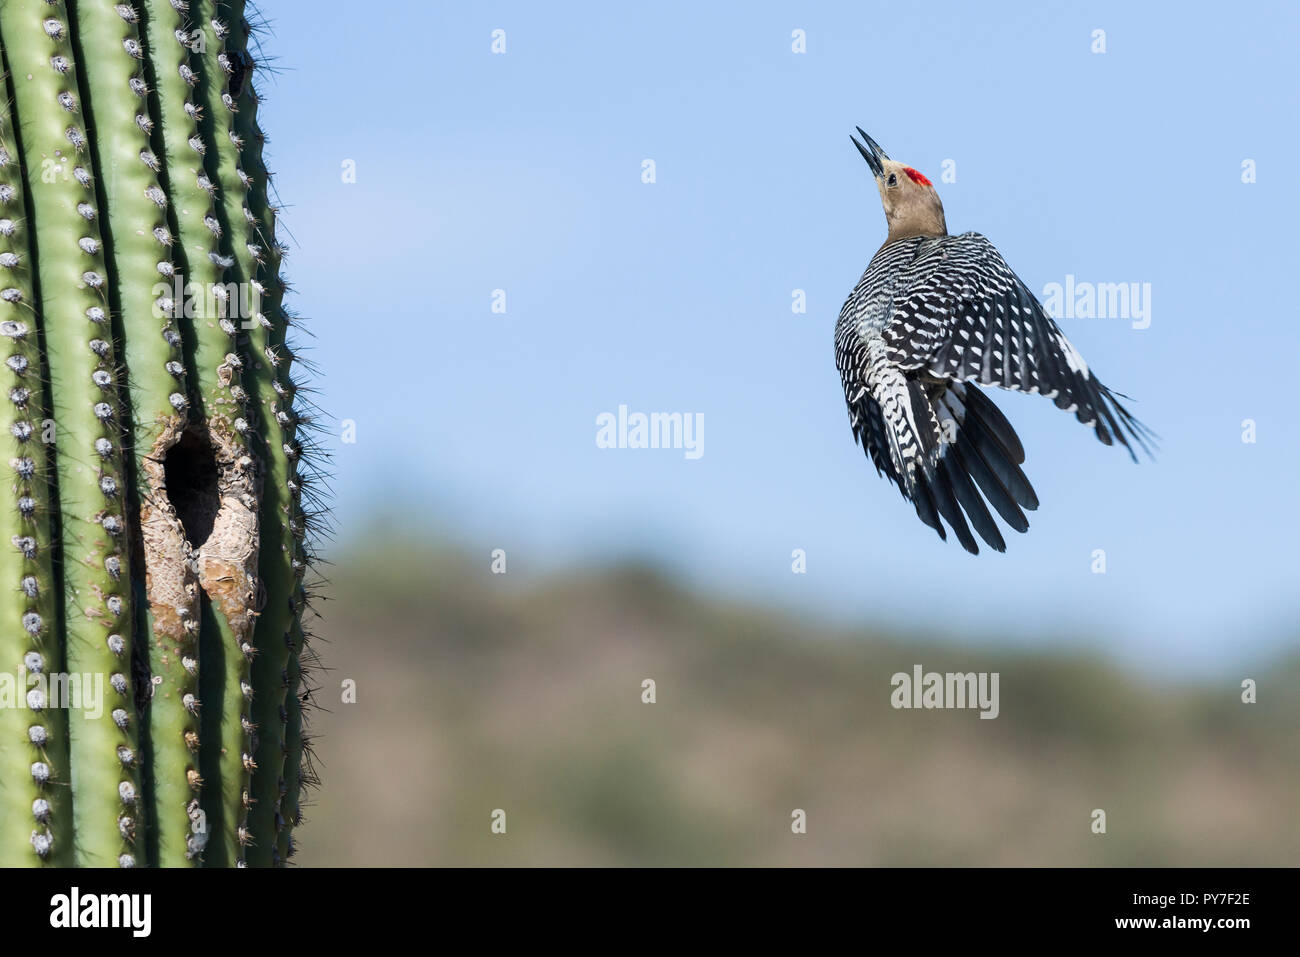 A male Gila Woodpecker (Melanerpes uropygialis) explodes out of a nest in a Saguaro (Carnegiea gigantea), flying up to the top of the Saguaro. Arizona Stock Photo